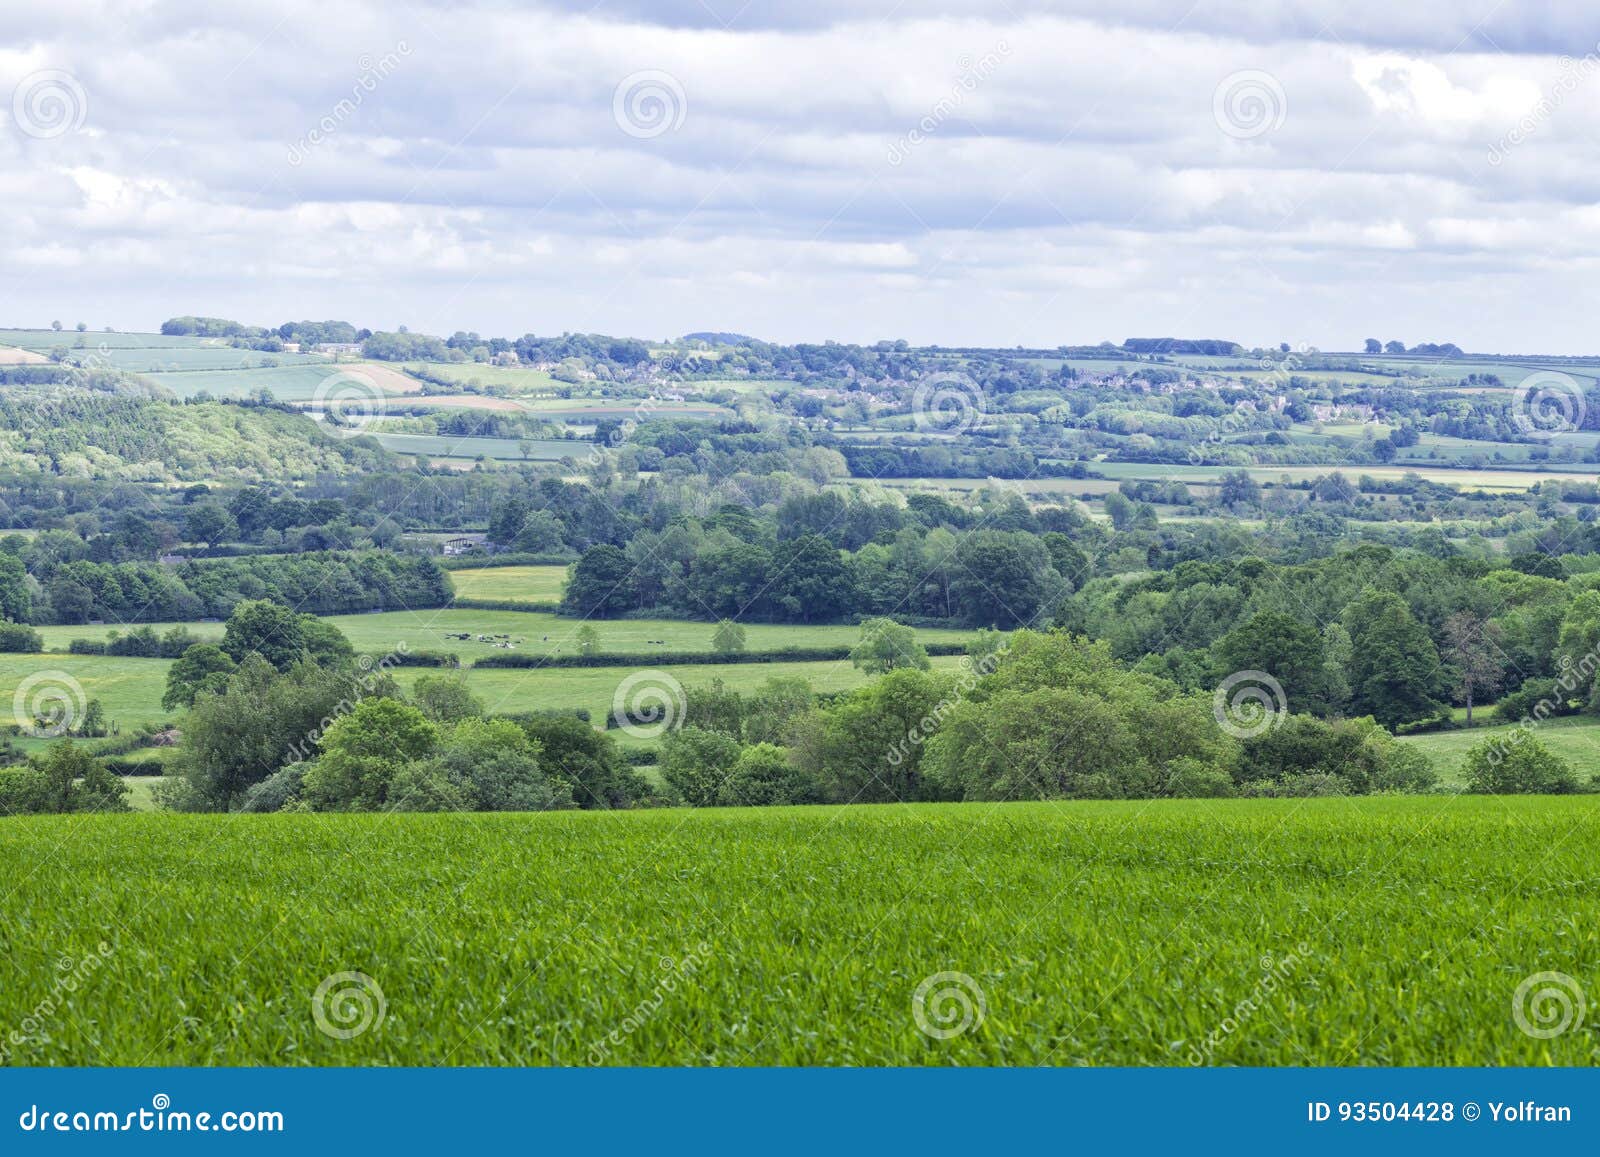 rolling hills with green fields, rural villages, woodlands